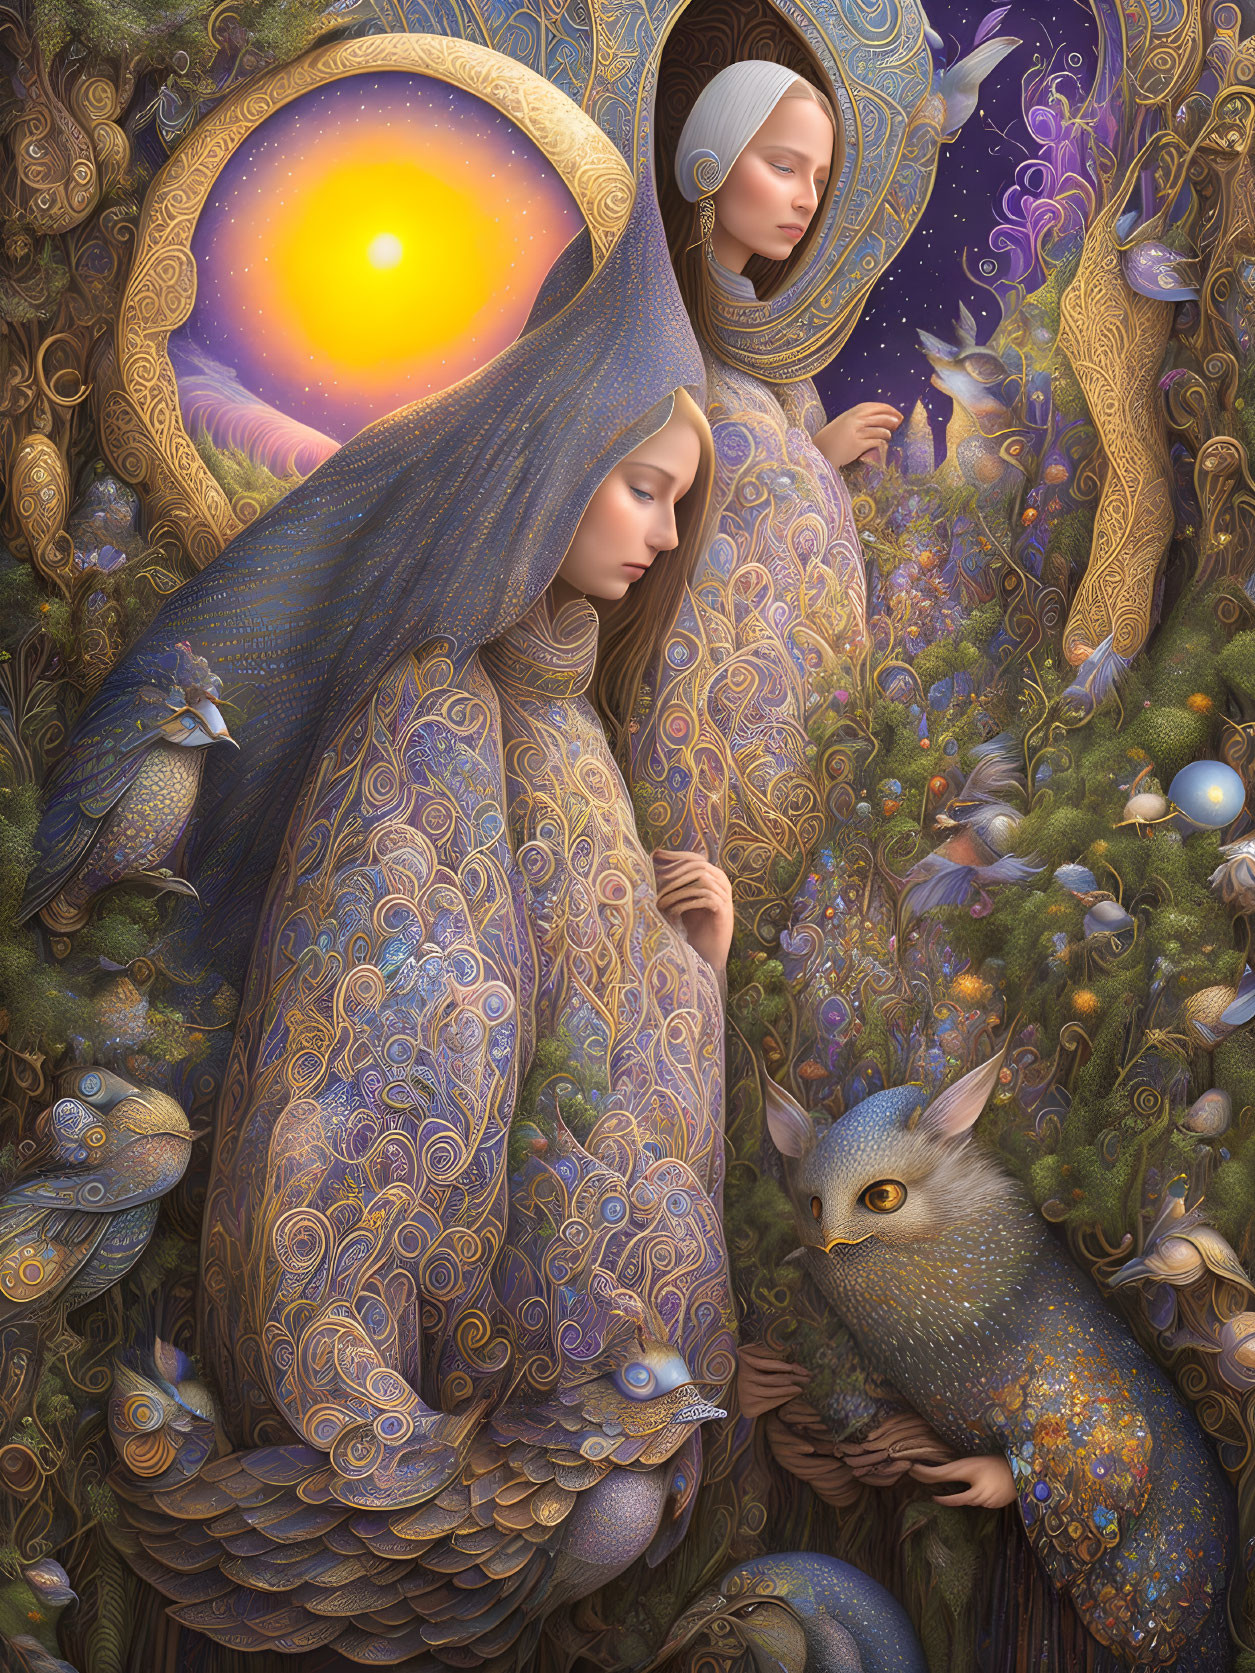 Fantasy-style artwork with serene female figures, celestial motifs, flowers, and owl